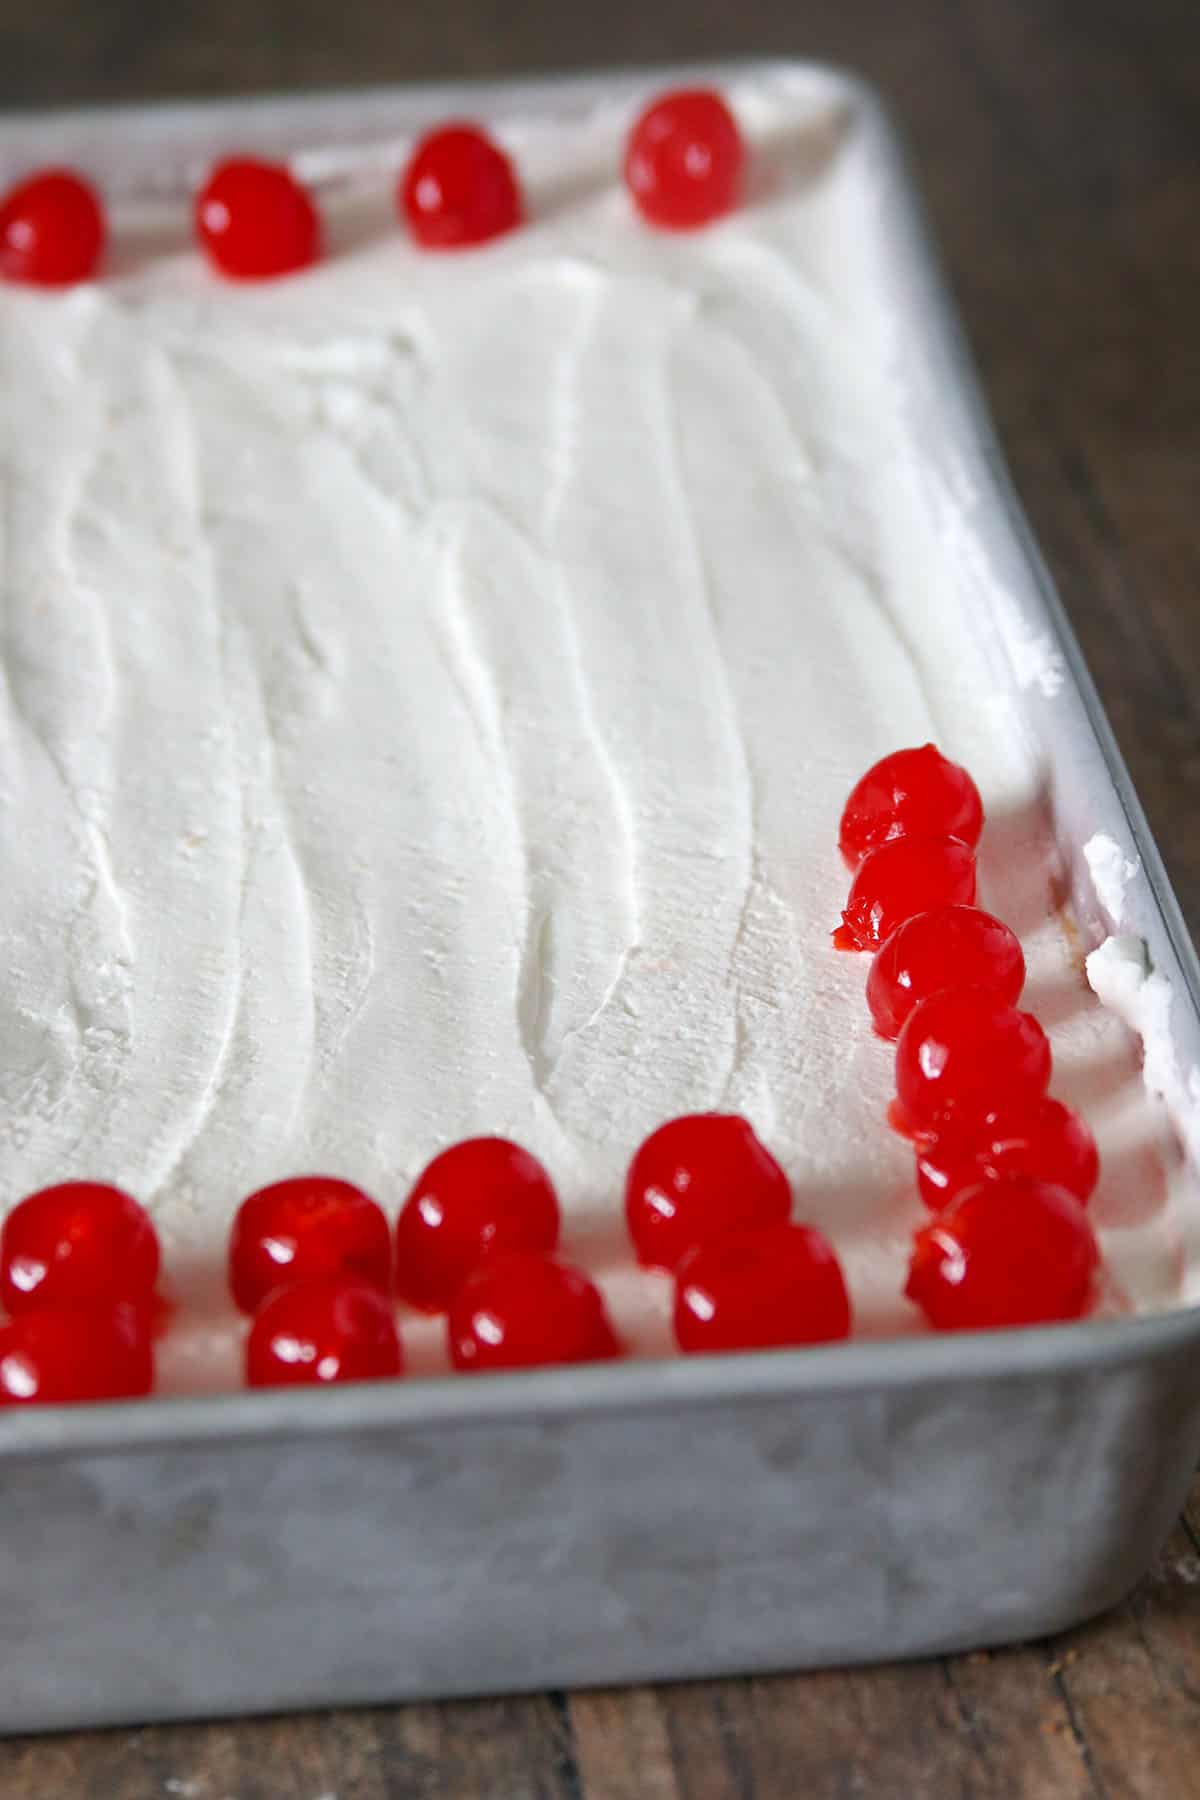 Whole Tres Leches Cake garnished with maraschino cherries.